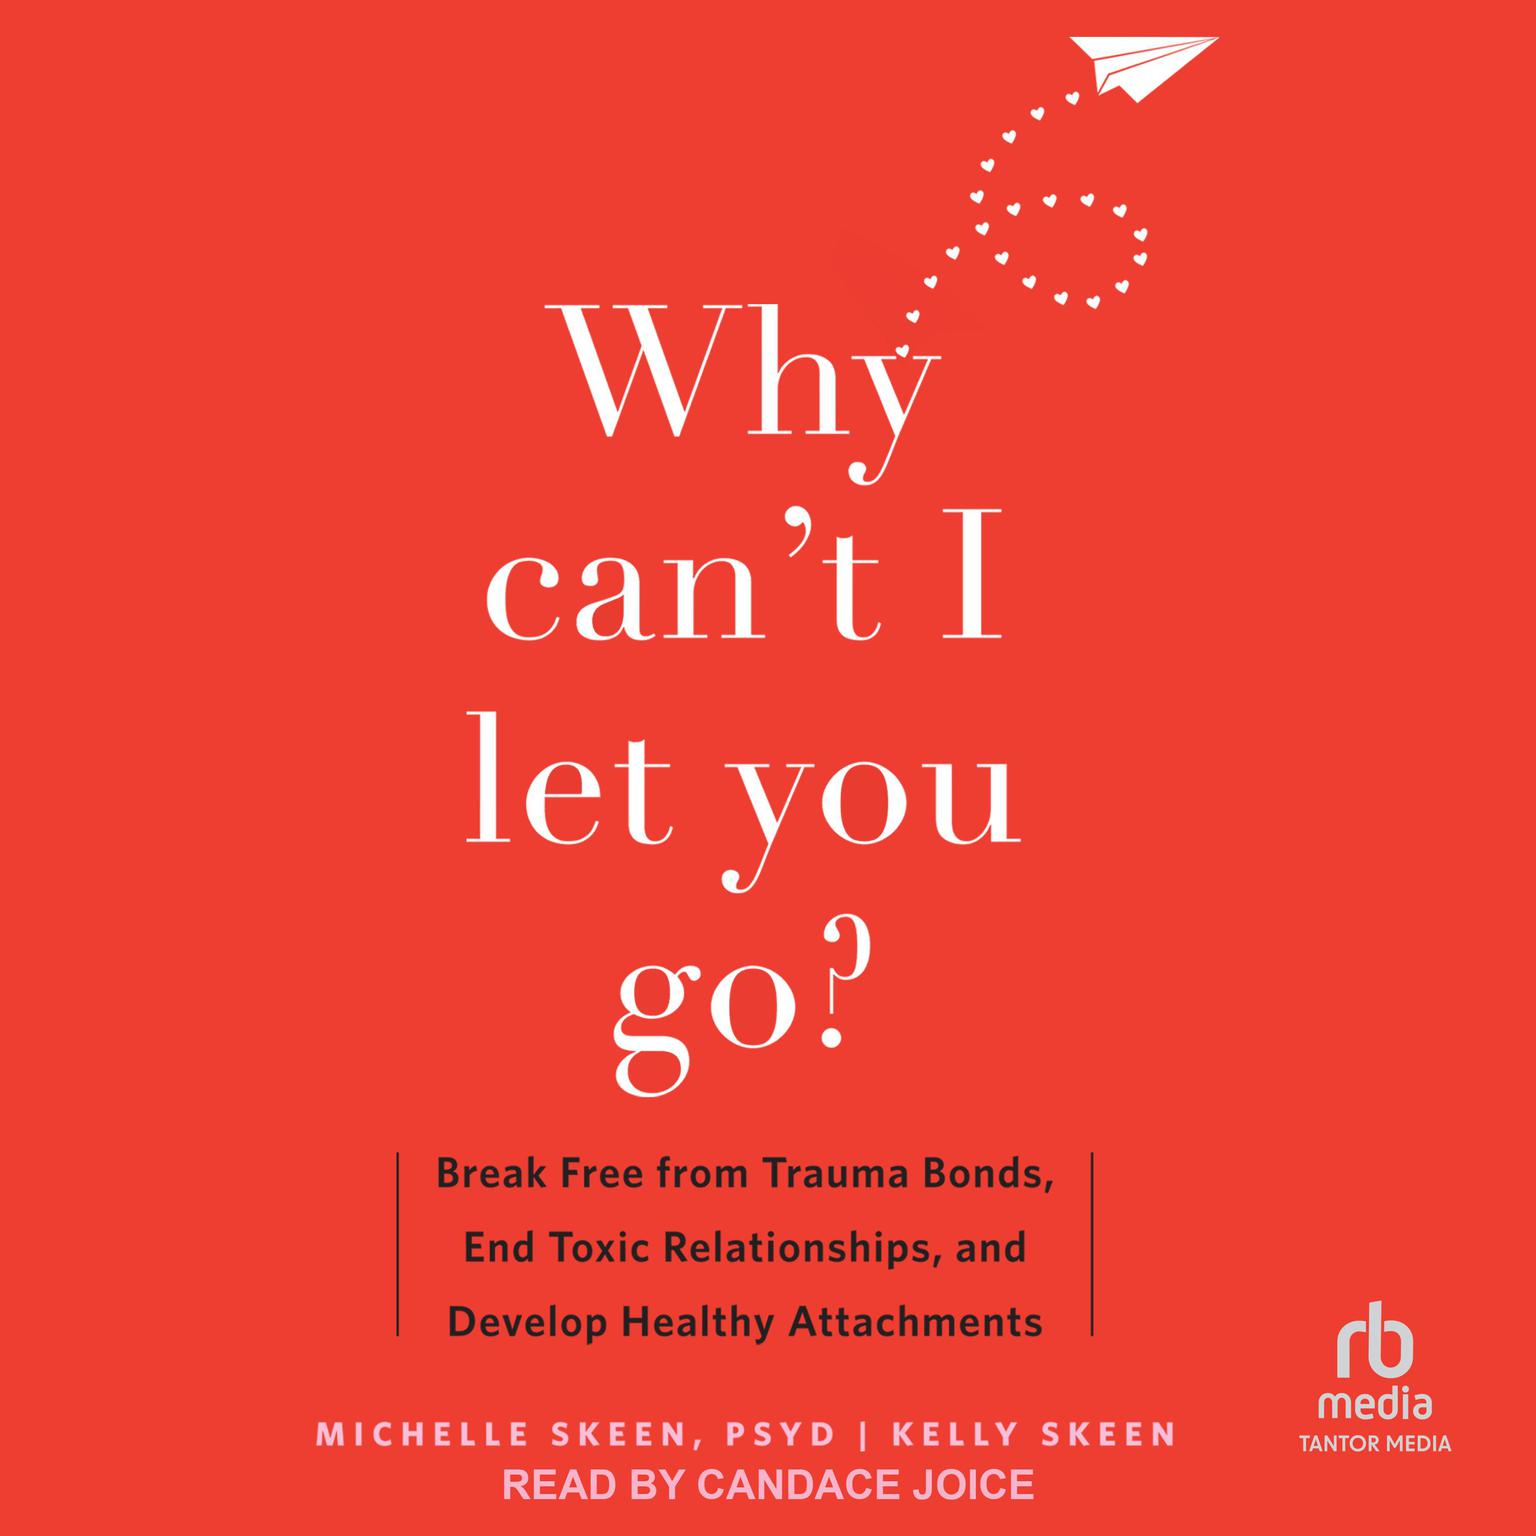 Why Cant I Let You Go?: Break Free from Trauma Bonds, End Toxic Relationships, and Develop Healthy Attachments Audiobook, by Michelle Skeen